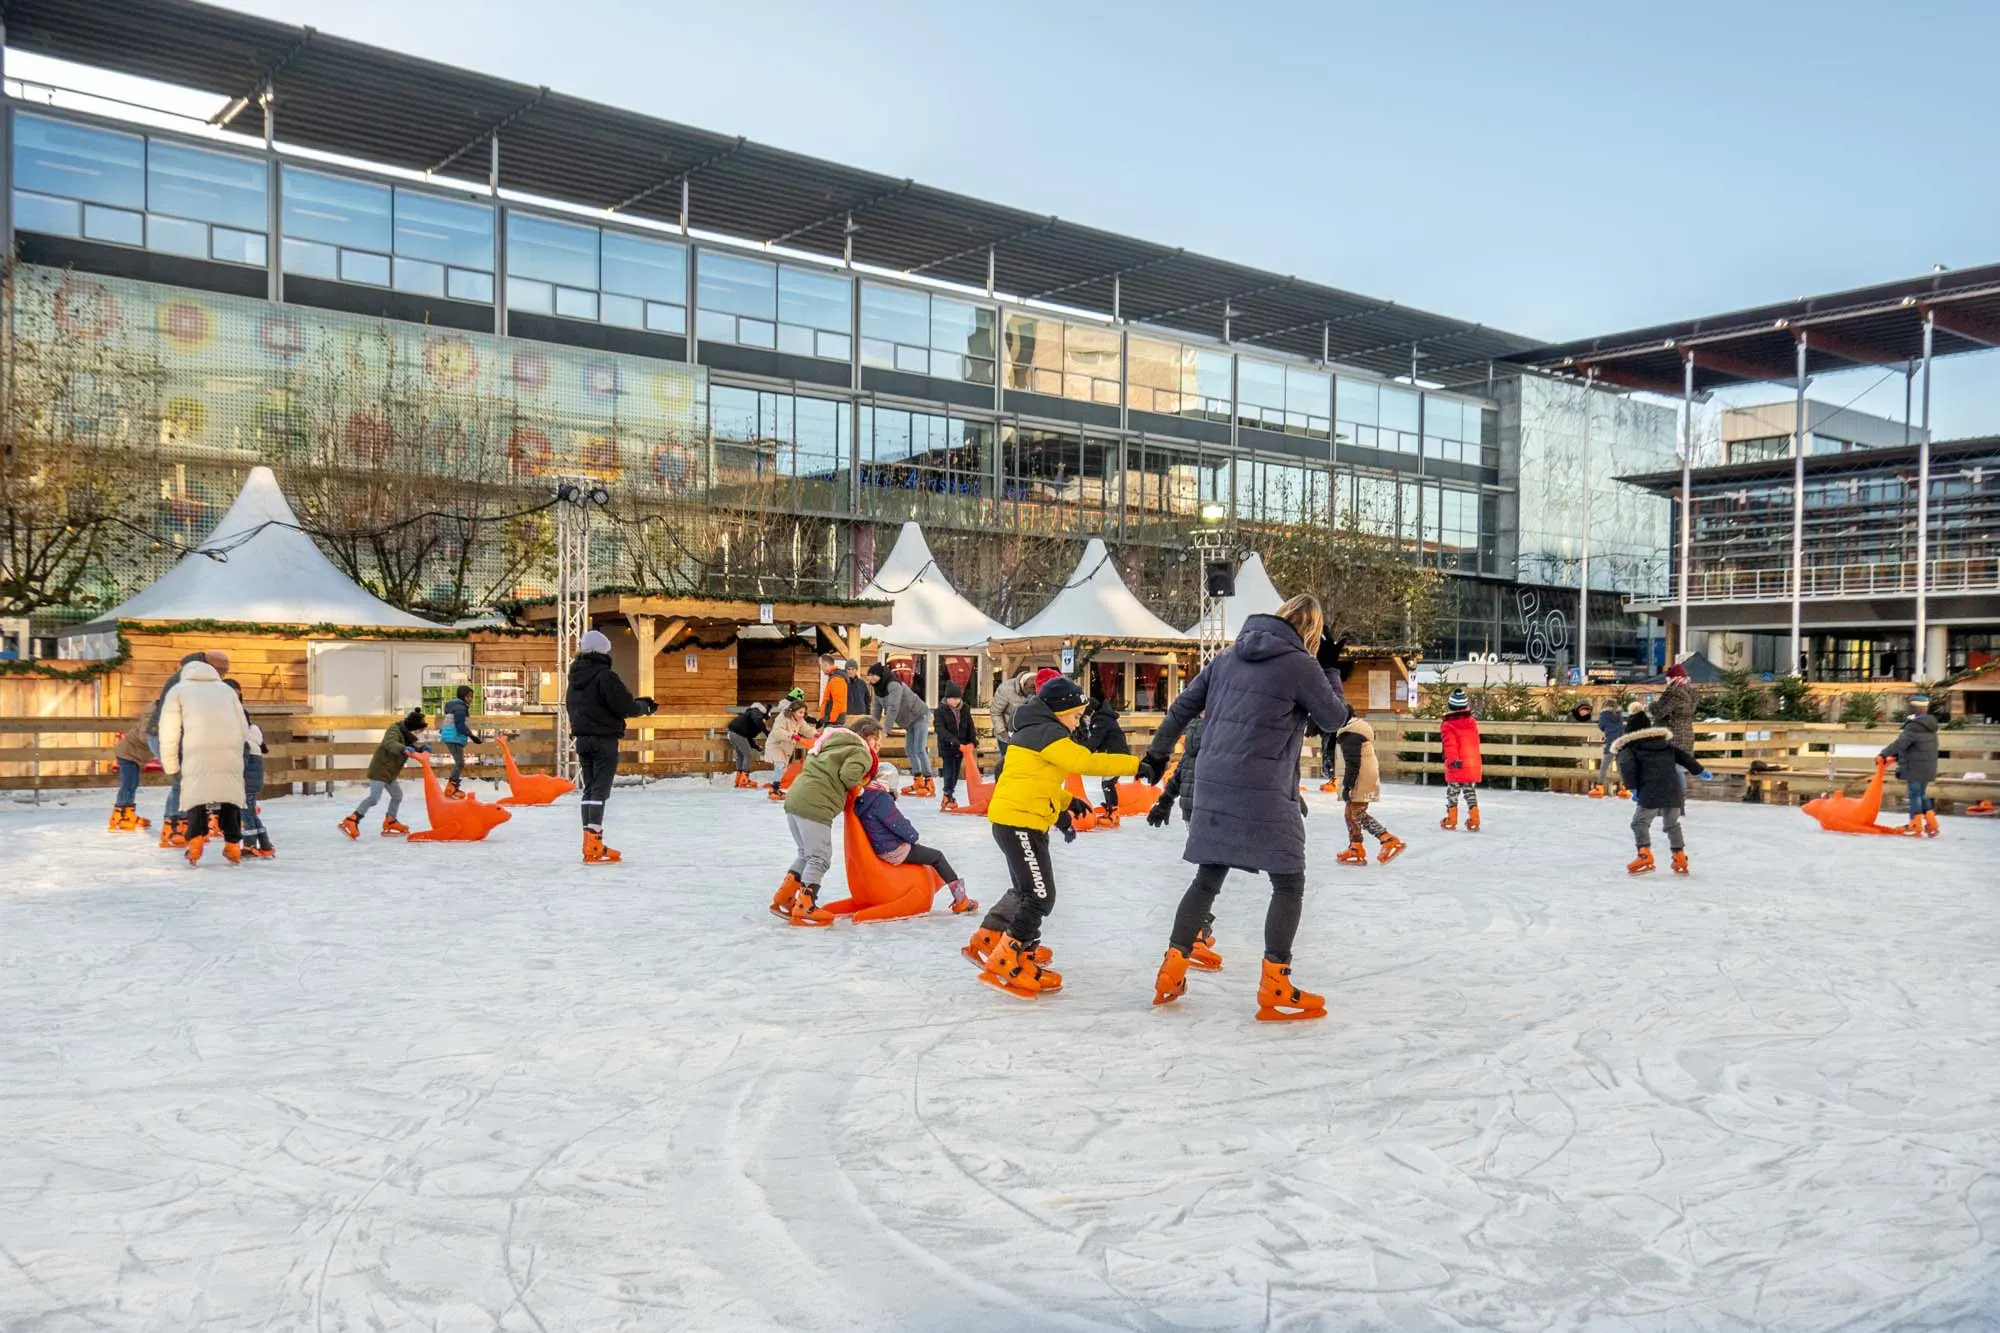 People skating on an ice-skating rink surrounded by market chalets.